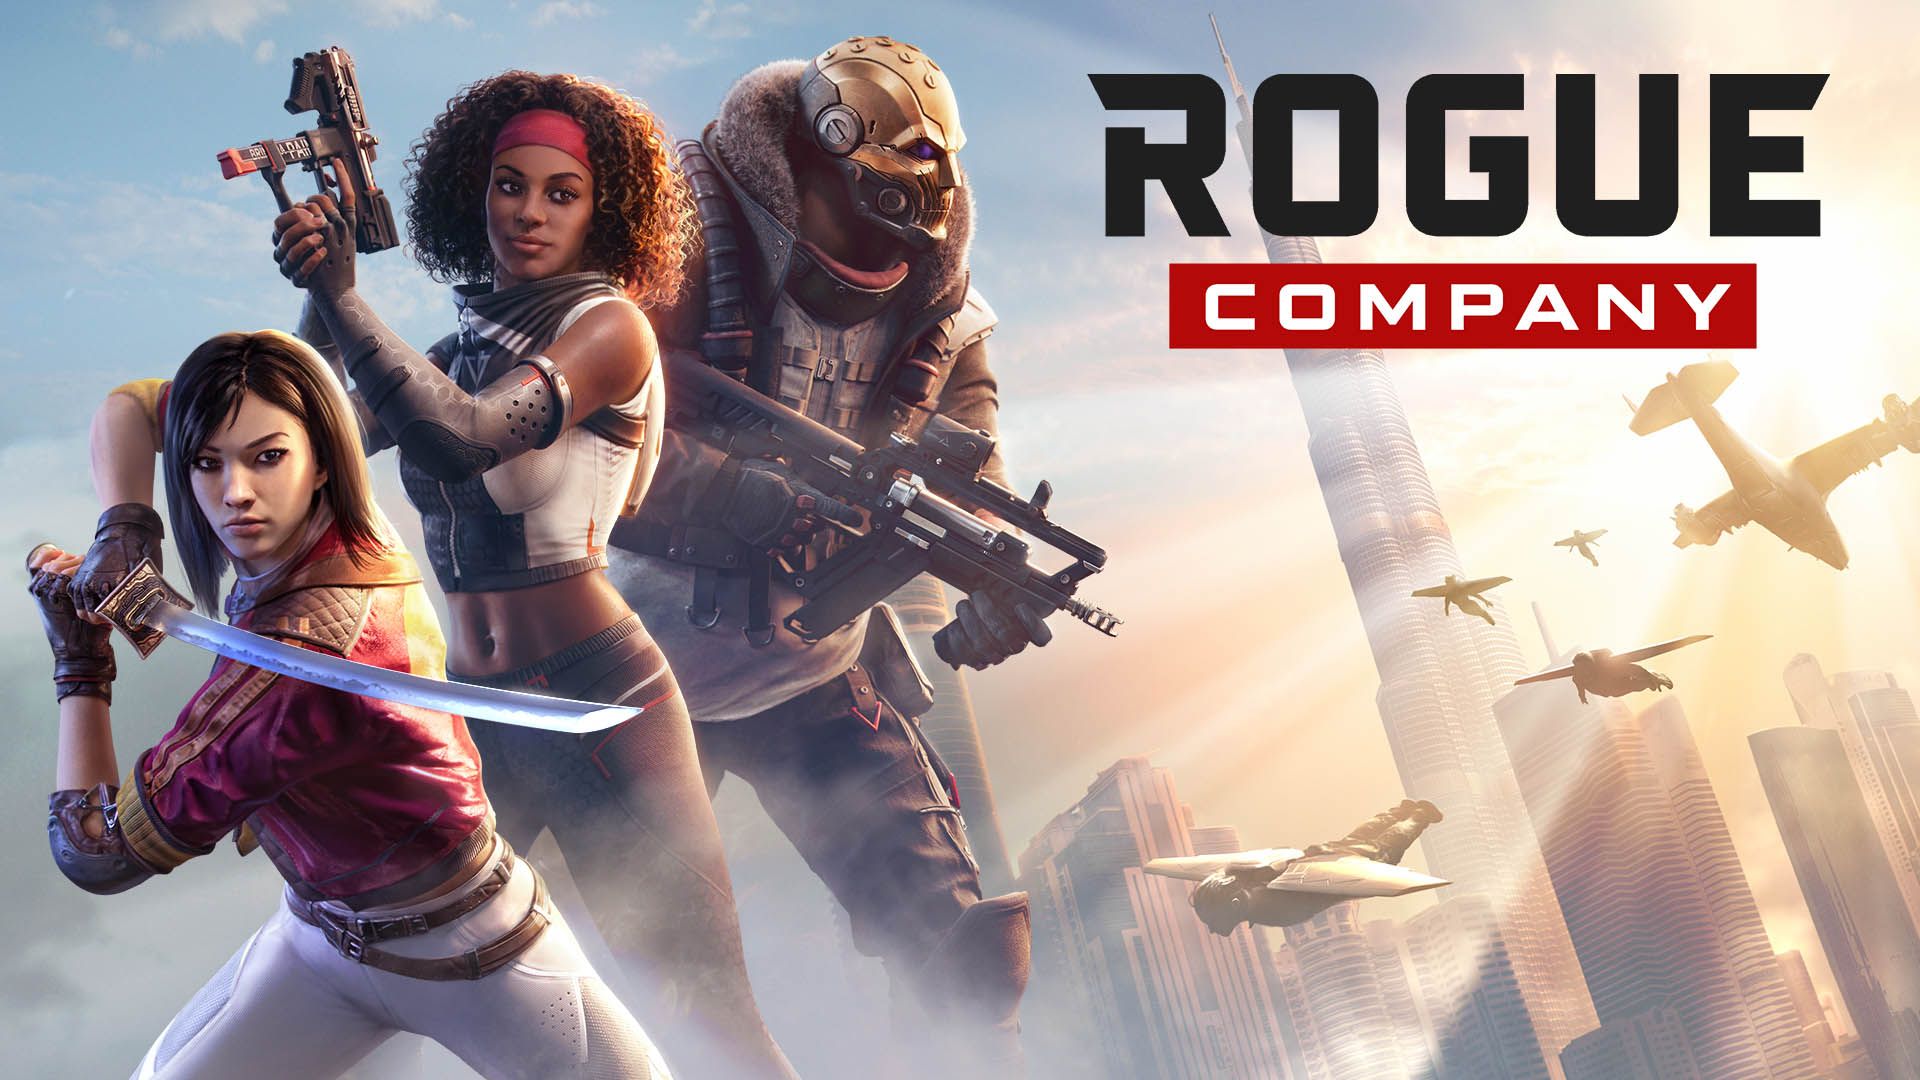 Rogue Company for Nintendo Switch Game Details